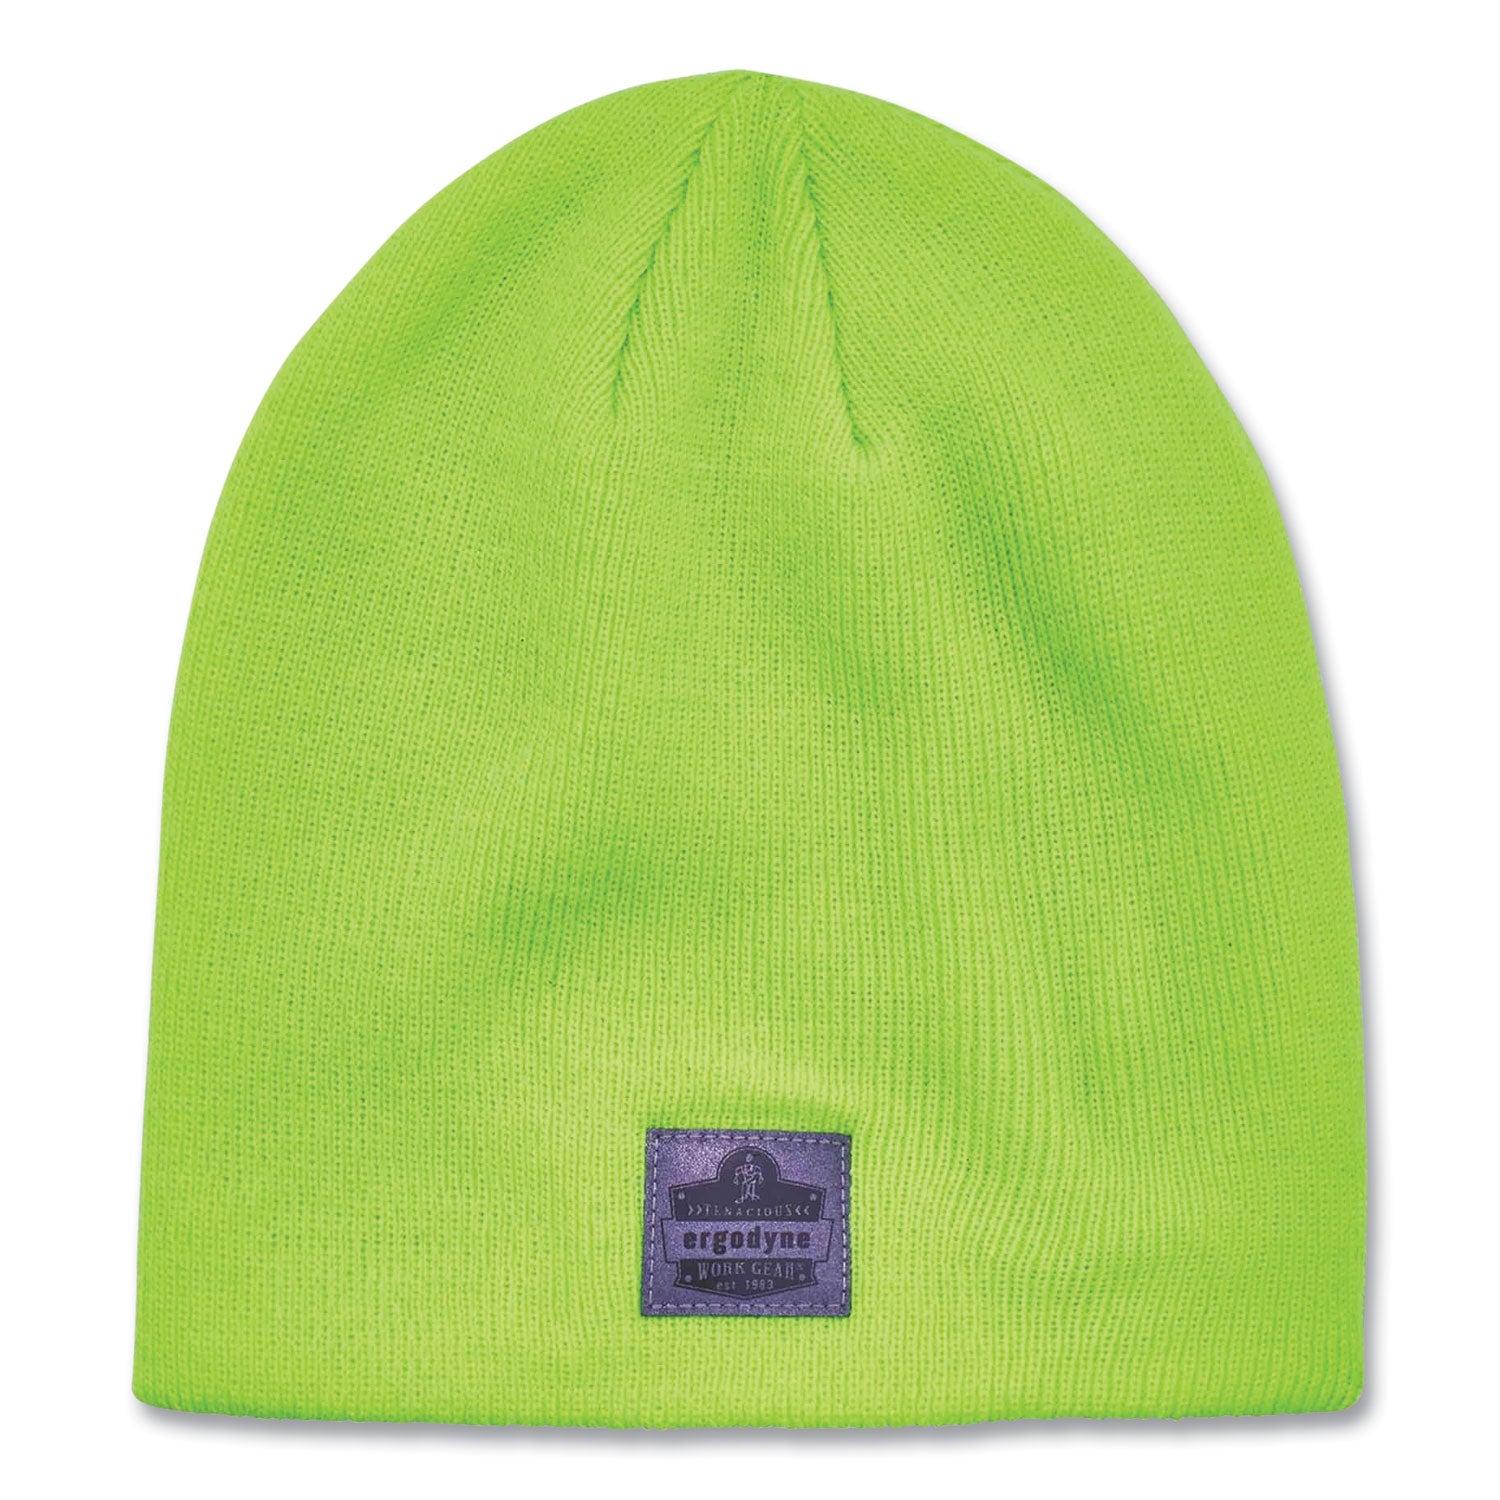 n-ferno-6812-rib-knit-beanie-one-size-fits-most-lime-ships-in-1-3-business-days_ego16813 - 1